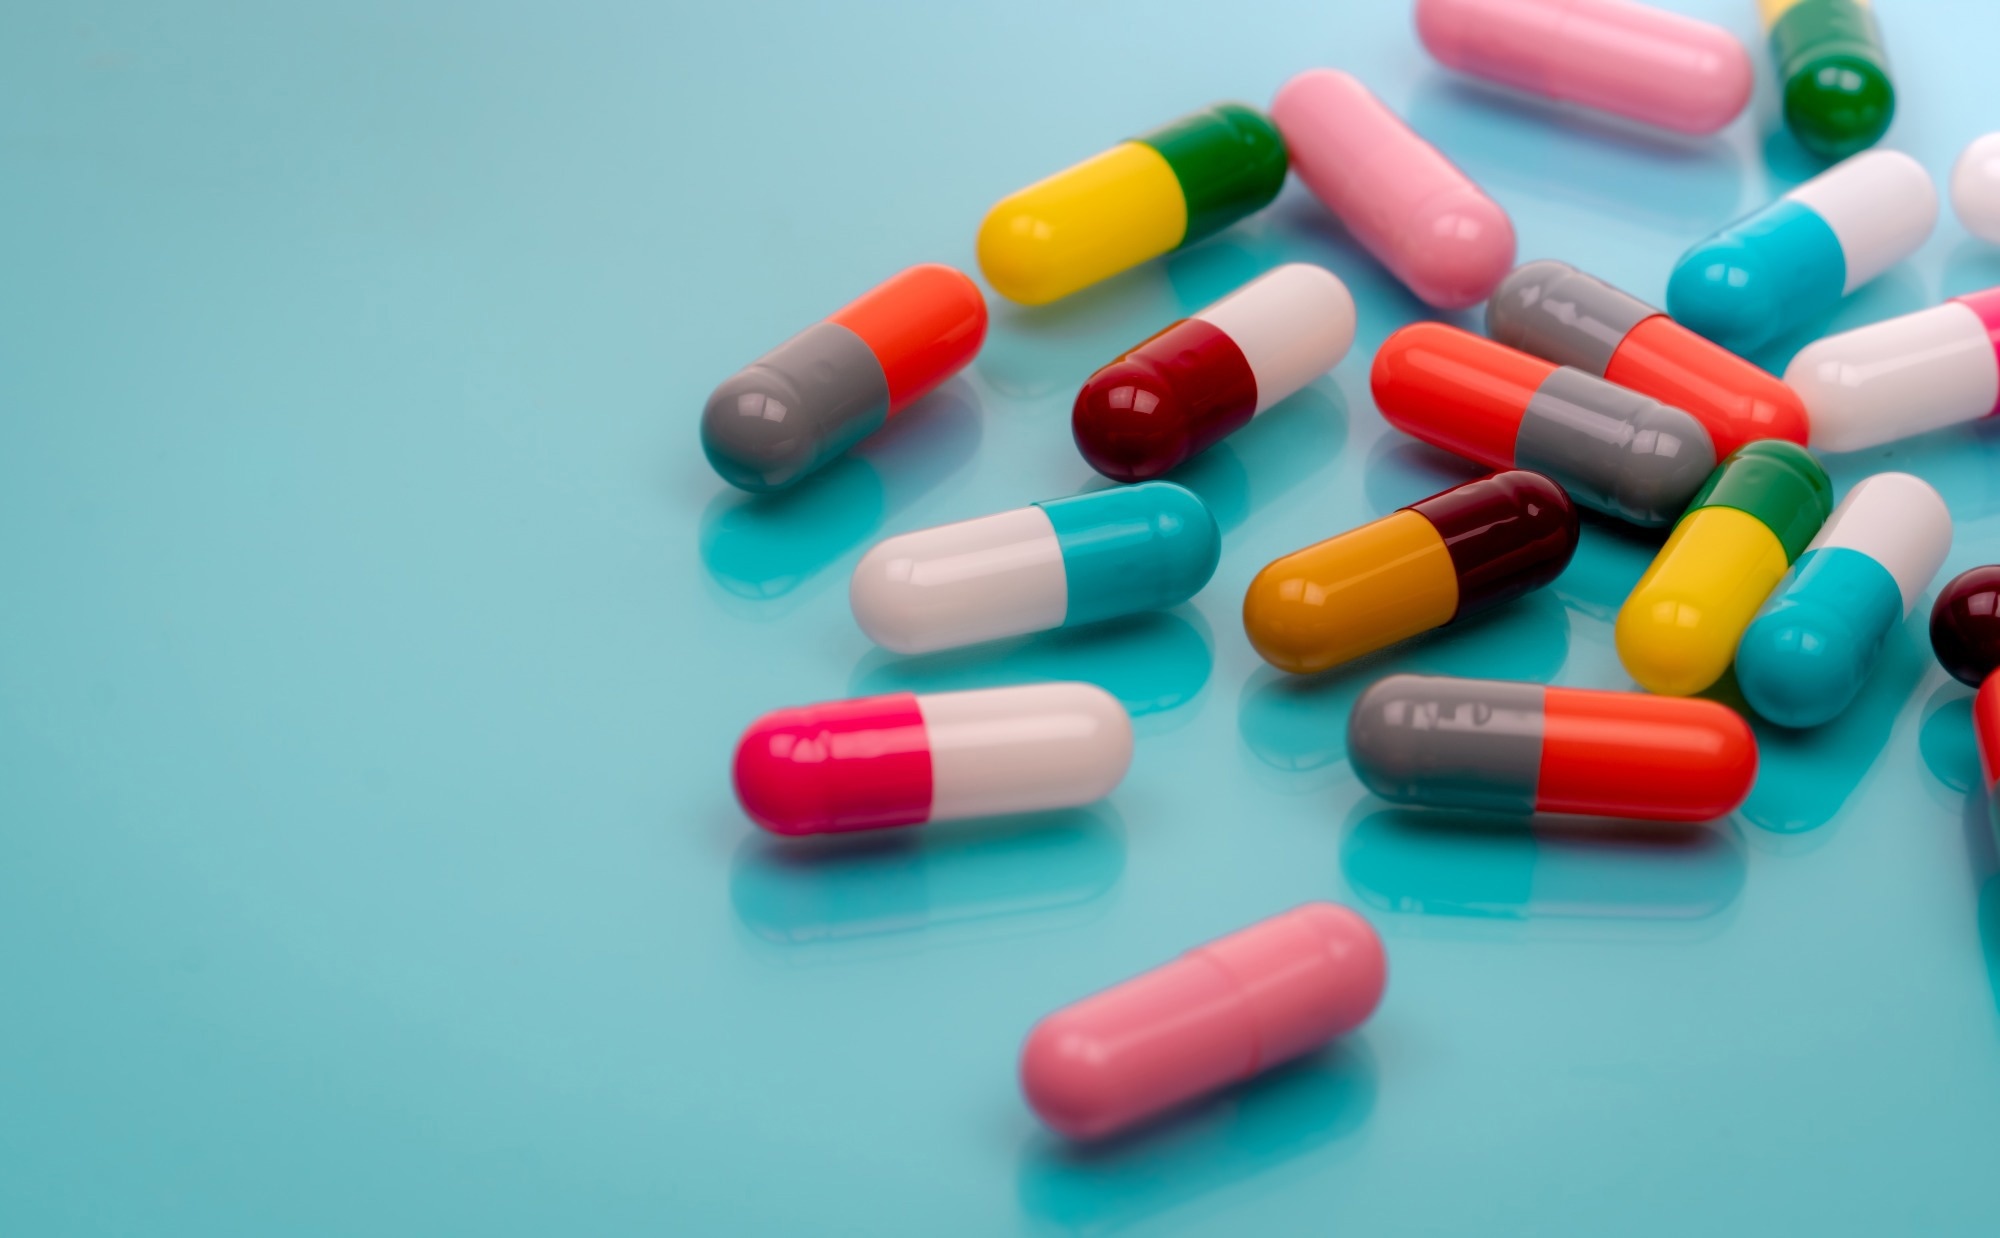 Study: Awareness of antibiotic resistance: a tool for measurement among human and animal health care professionals in LMICs and UMICs. Image Credit: Fahroni/Shutterstock